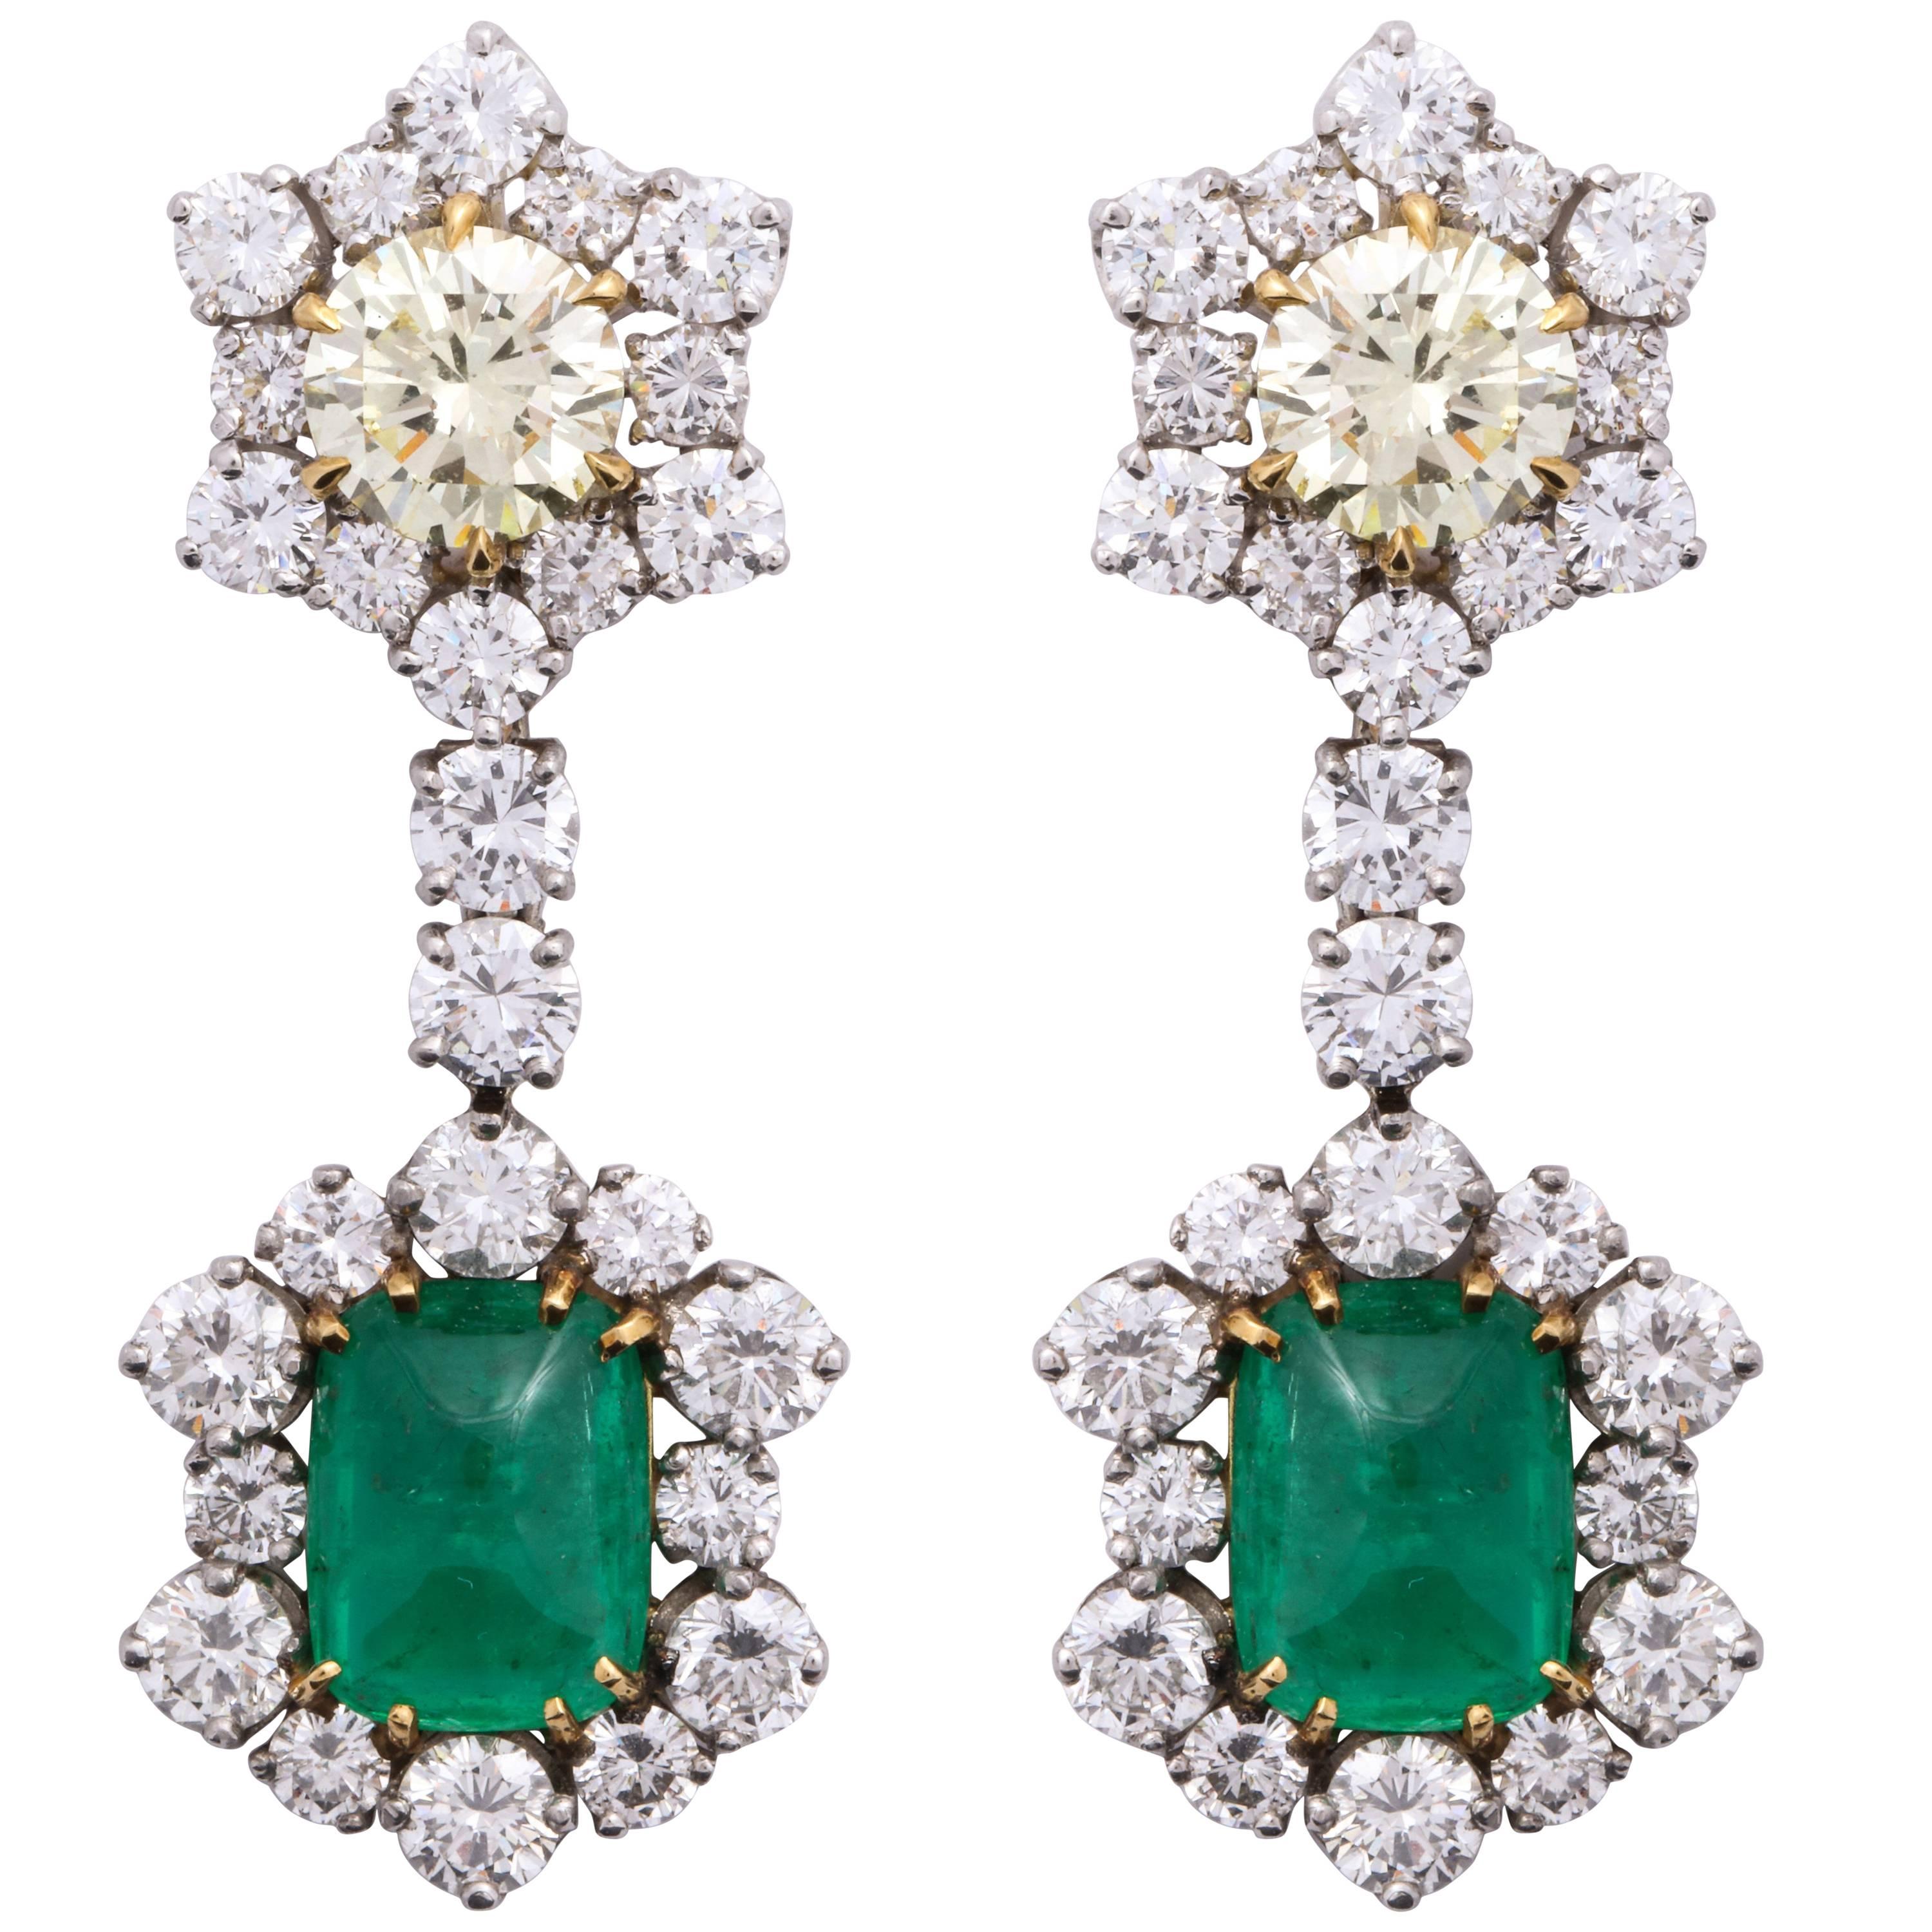 Platinum, Yellow Gold, Diamond and Cabochon Emerald Ear Pendant Earrings For Sale